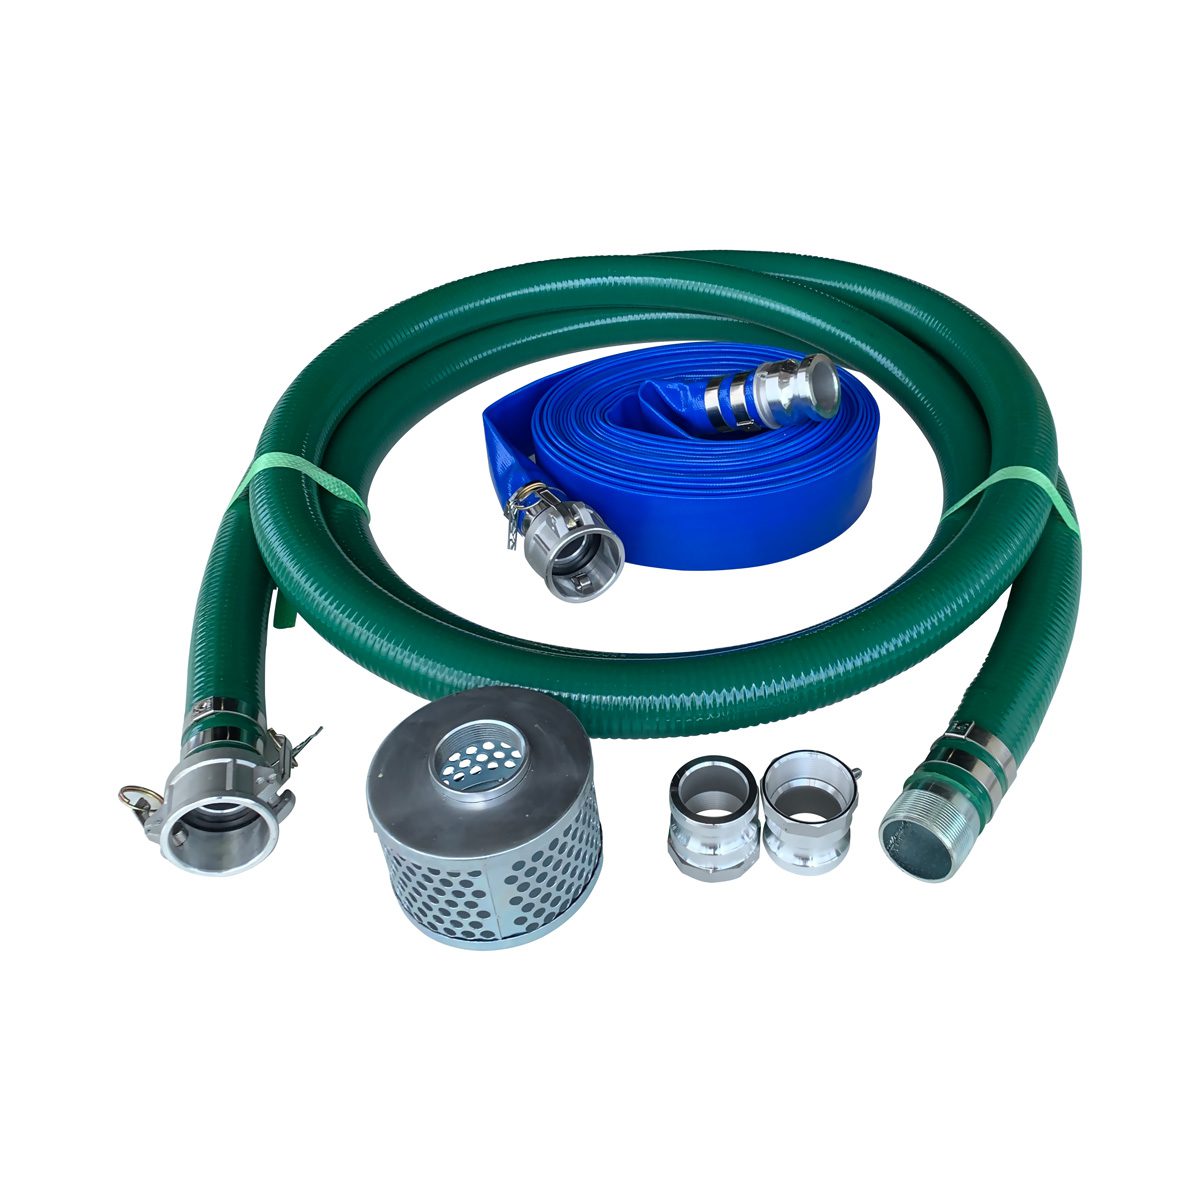 1-1/2" Green FCAM x MP Water Suction Hose Complete Kit w/25' Blue Discharge Hose 